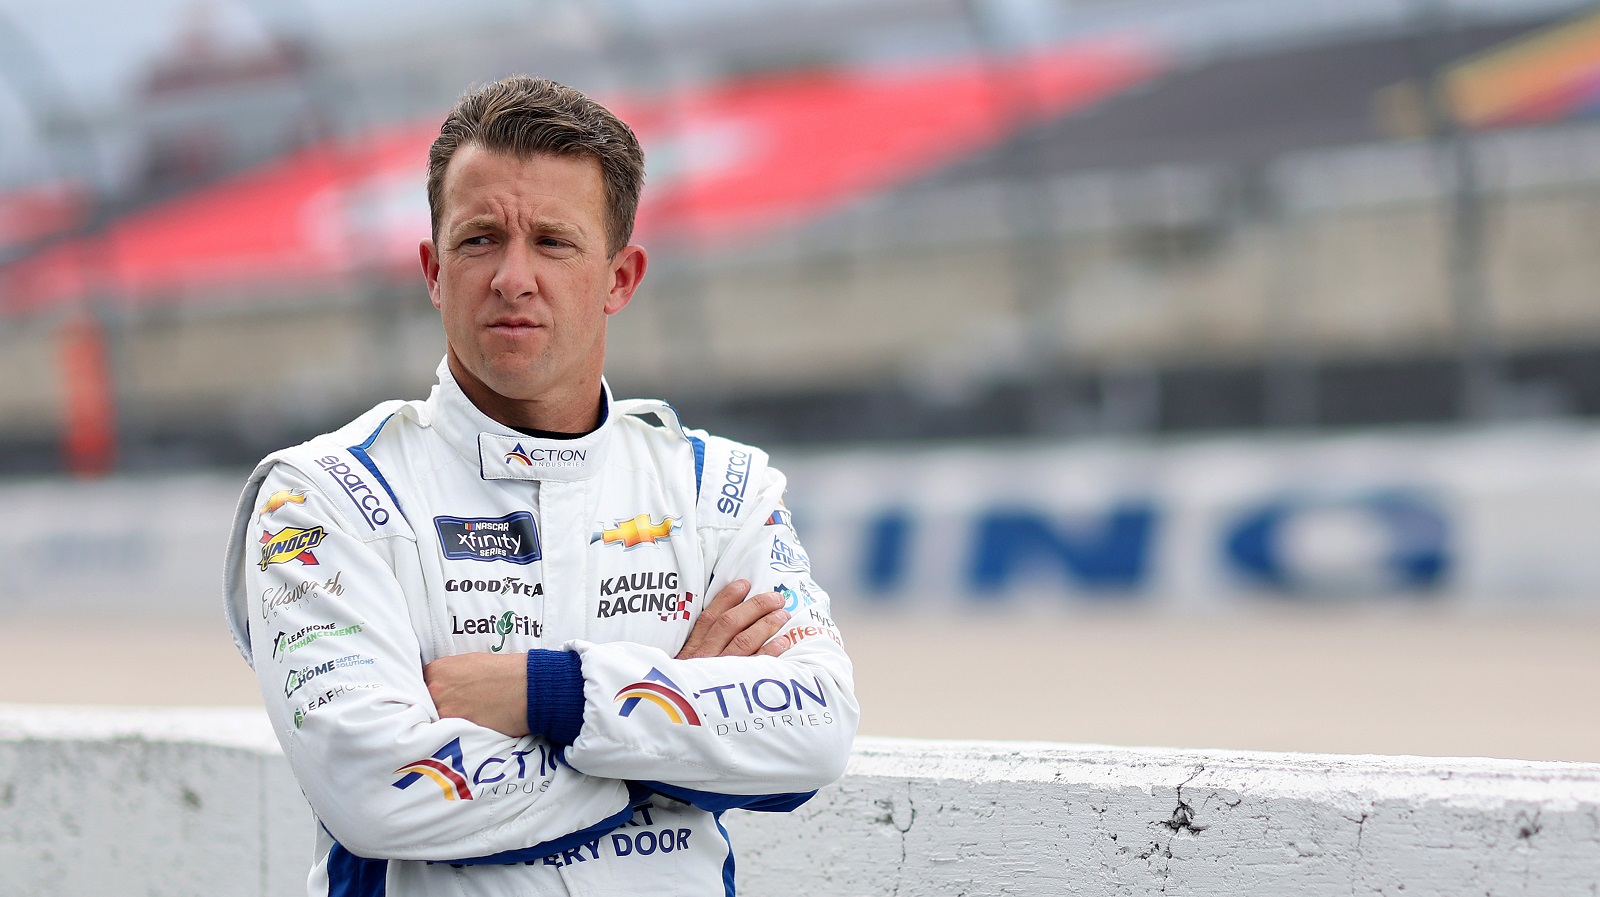 AJ Allmendinger waits on the grid during qualifying for the NASCAR Xfinity Series Mahindra ROXOR 200 at Darlington Raceway on May 6, 2022. | James Gilbert/Getty Images